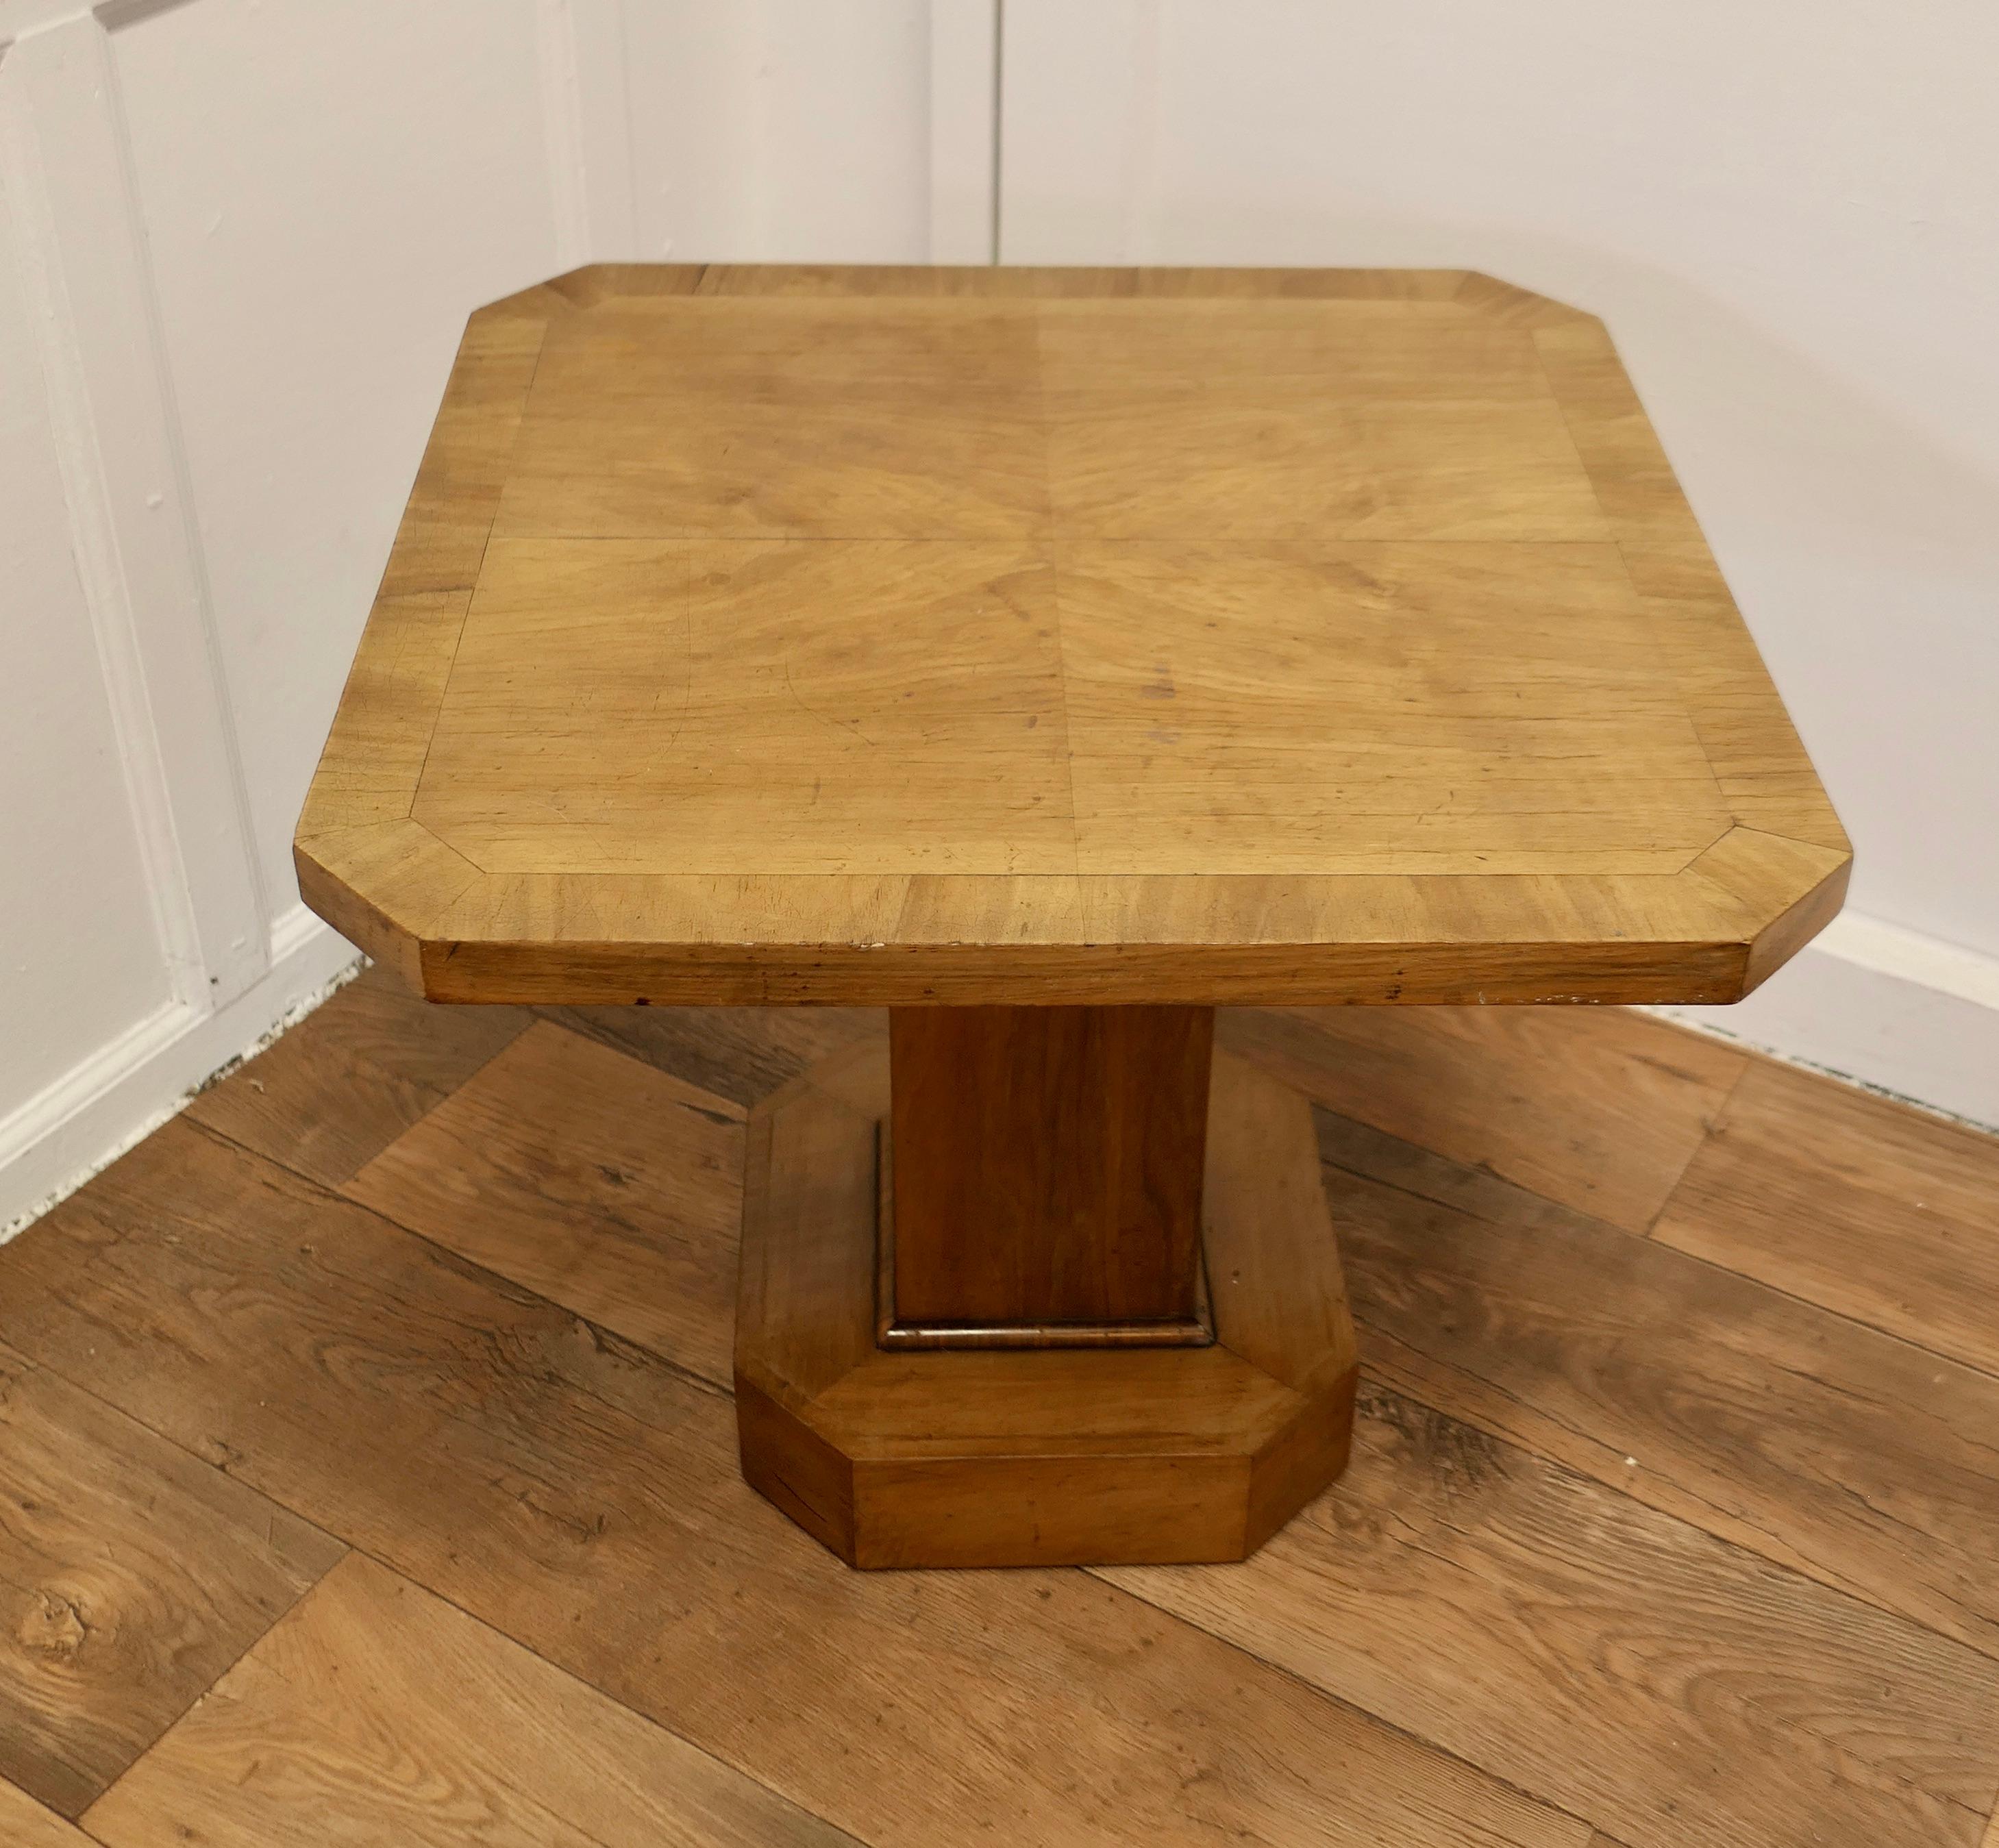 Odeon Style Art Deco Maple Coffee Table In Good Condition For Sale In Chillerton, Isle of Wight